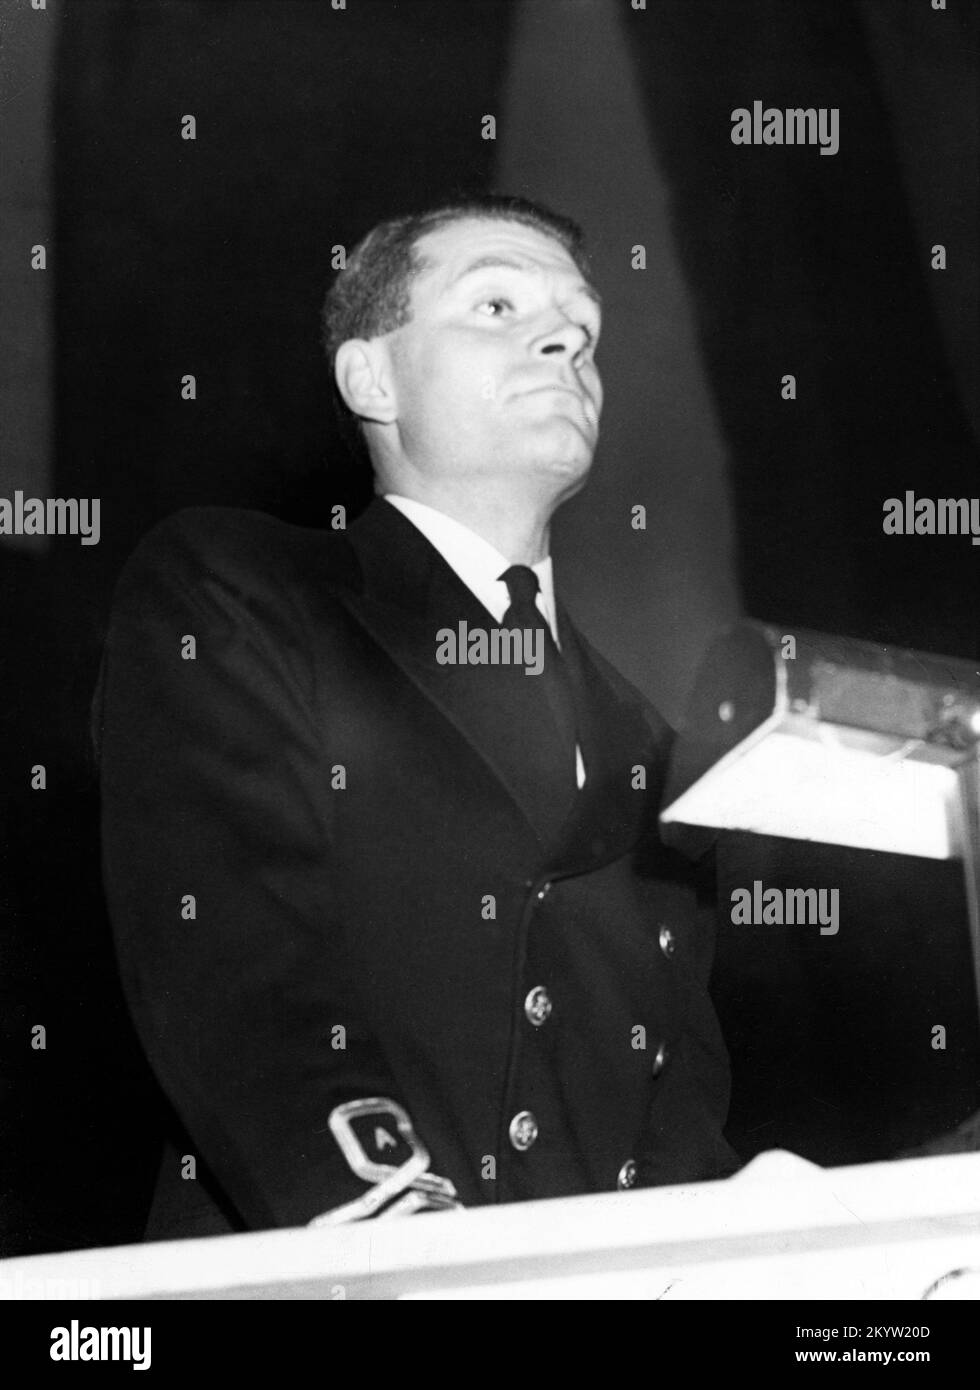 Lieutenant LAURENCE OLIVIER R.N.V.R., Fleet Air Arm speaking the prologue at the opening of the RED ARMY DAY celebration at the Royal Albert Hall in London on February 23rd 1944 to salute the 26th anniversary of the Red Army of our Russian Ally during World War Two Stock Photo